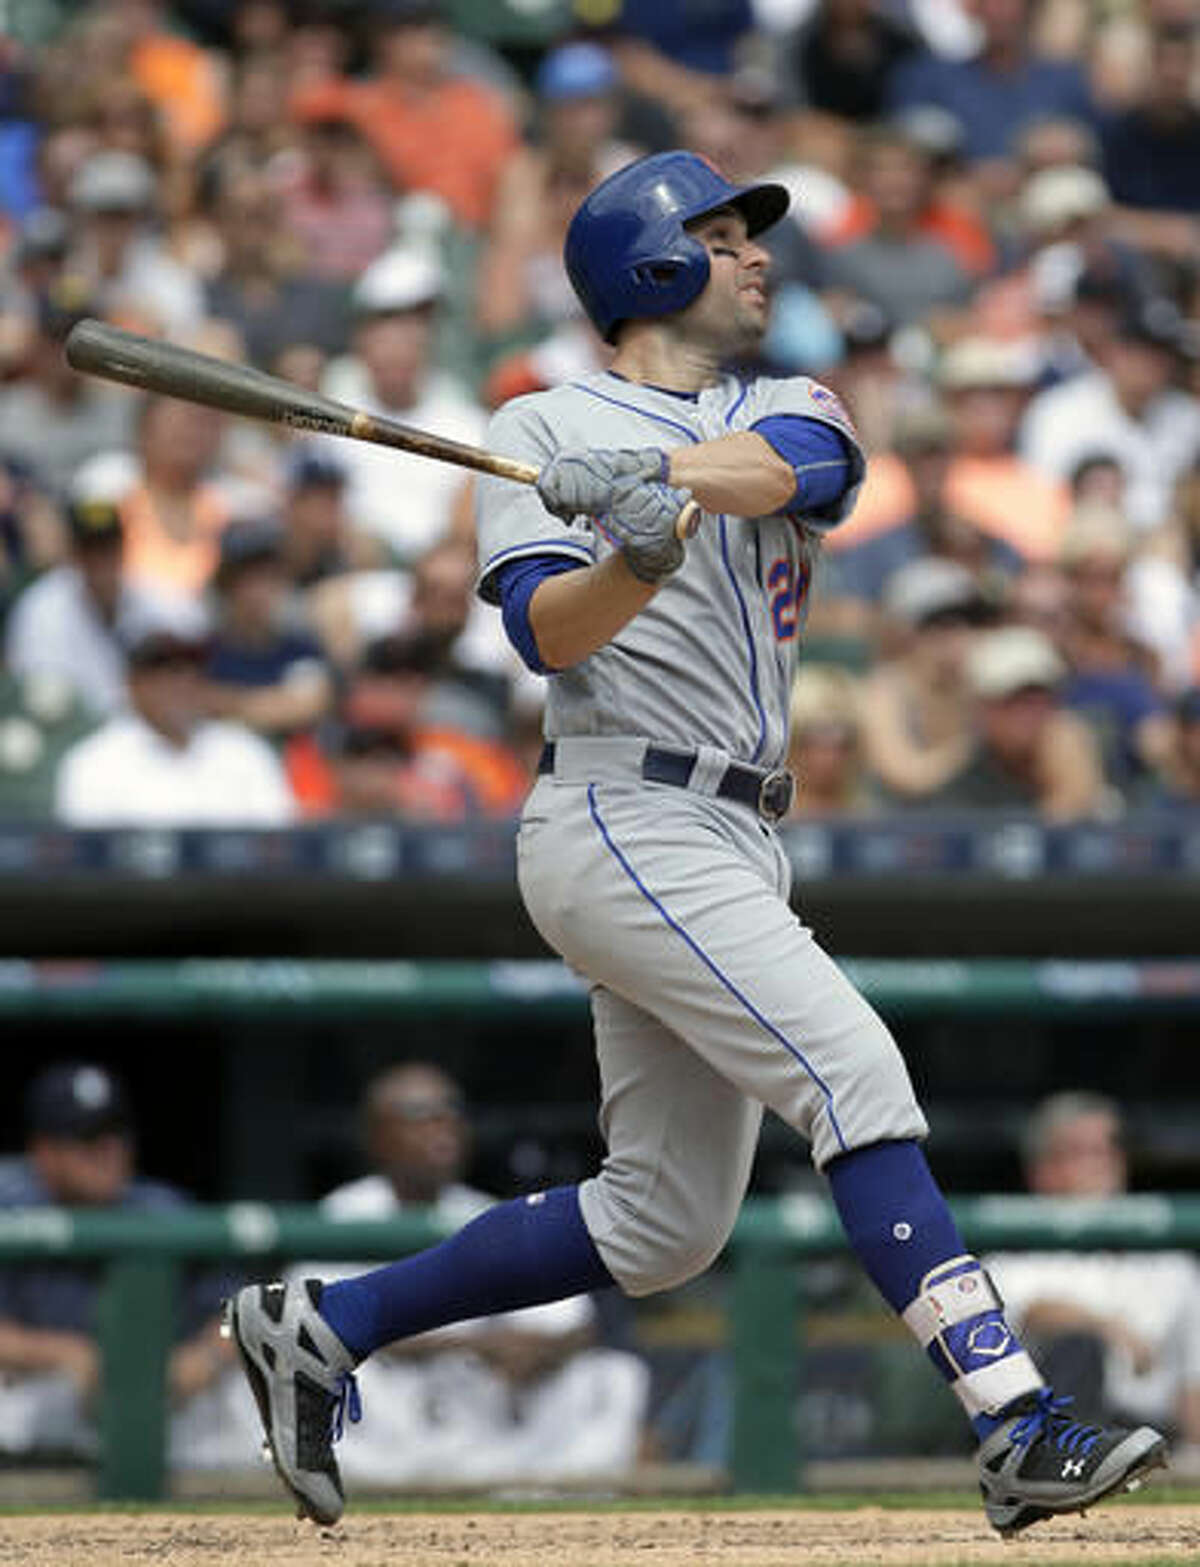 New York Mets' Neil Walker hits a two-run home run against the Detroit Tigers during the ninth inning of an interleague baseball game Sunday, Aug. 7, 2016, in Detroit. (AP Photo/Duane Burleson)